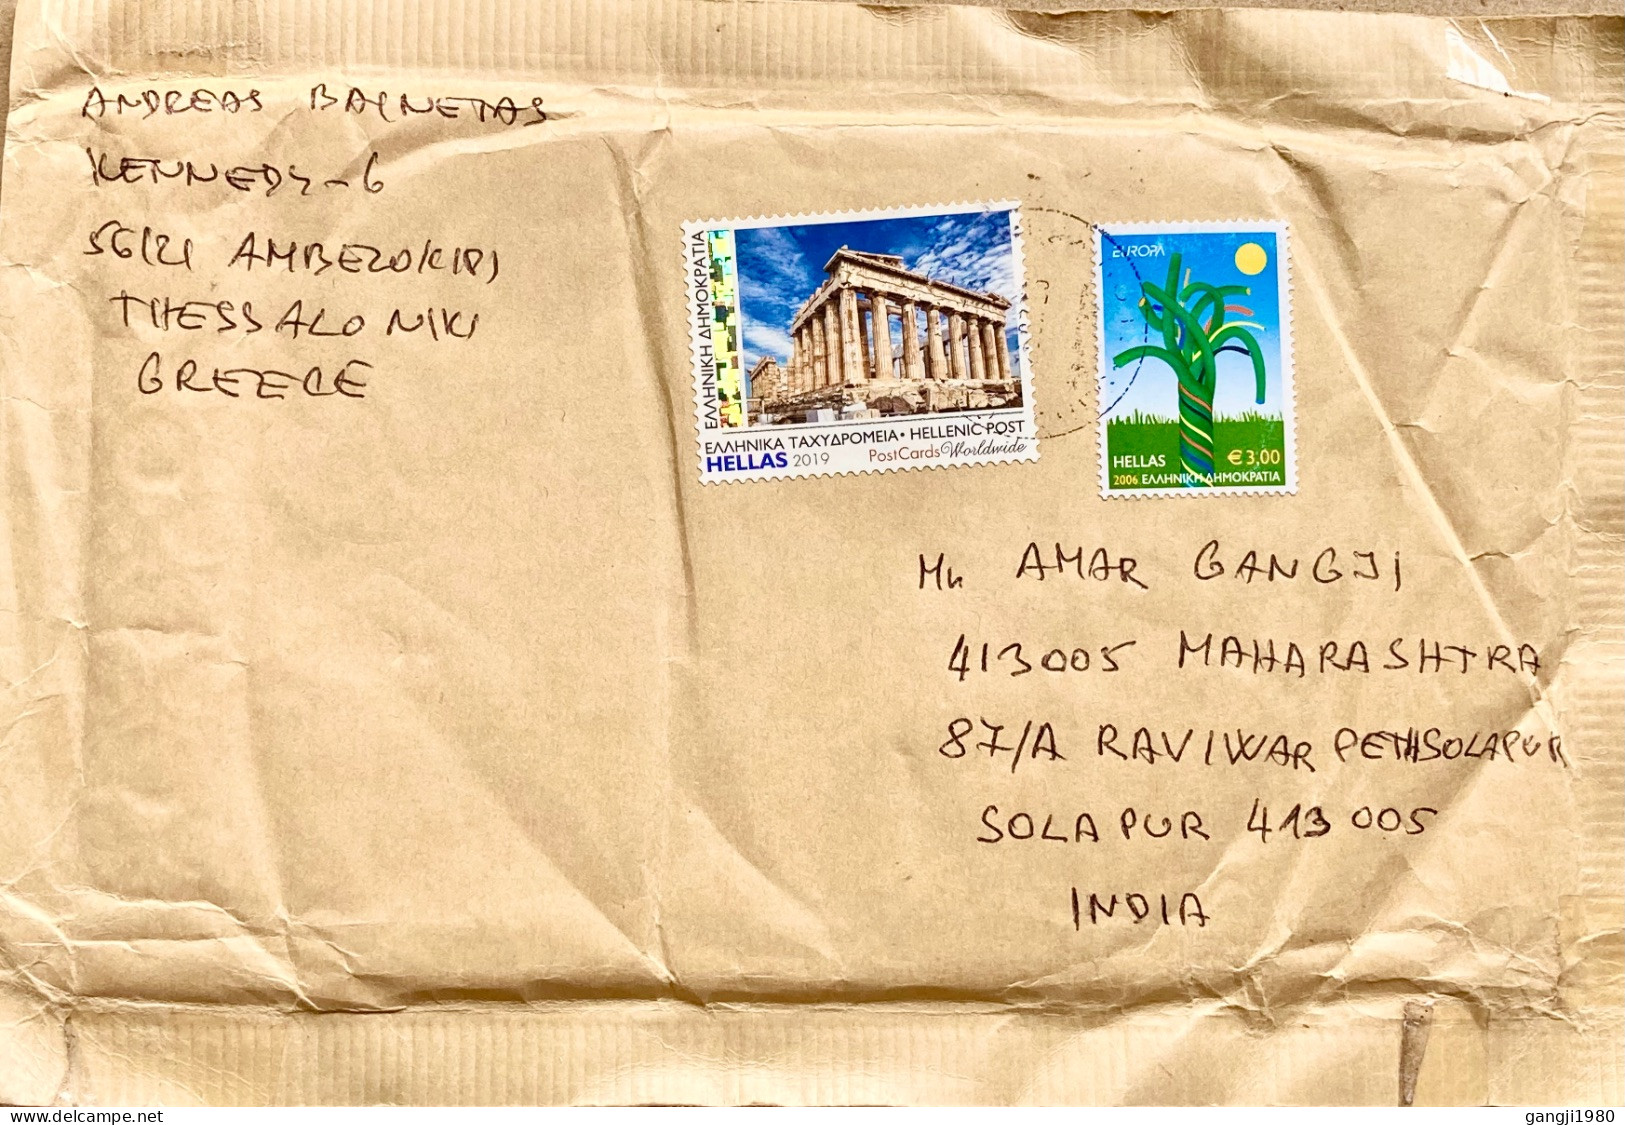 GREECE 2023, COVER USED INDIA, 2006 EUROPA, 2019 ARCHITECTURE, HERITAGE, STAMP FOR POSTCARD USED ON COVER, THESSALONIKI - Storia Postale